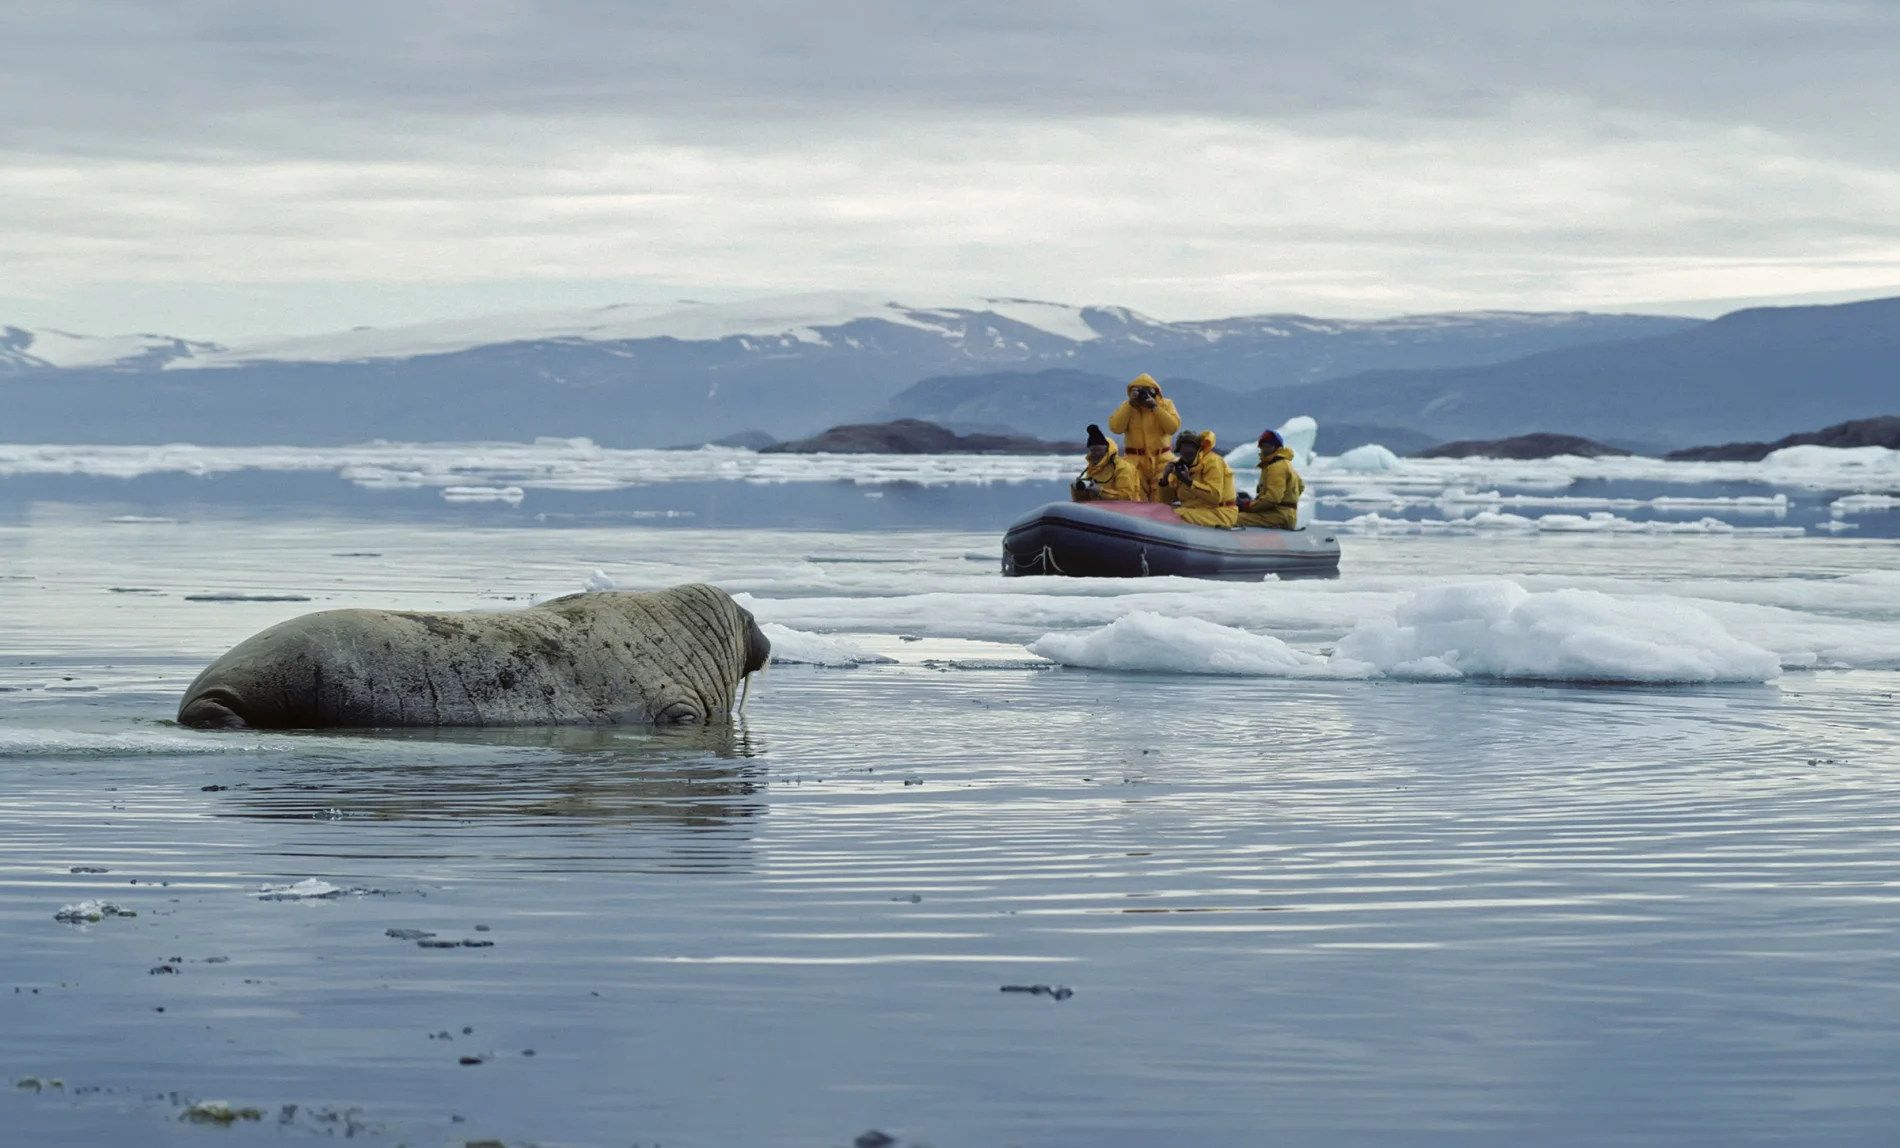 walrus in the arctic (JohnPitcher. iStock / Getty Images Plus)